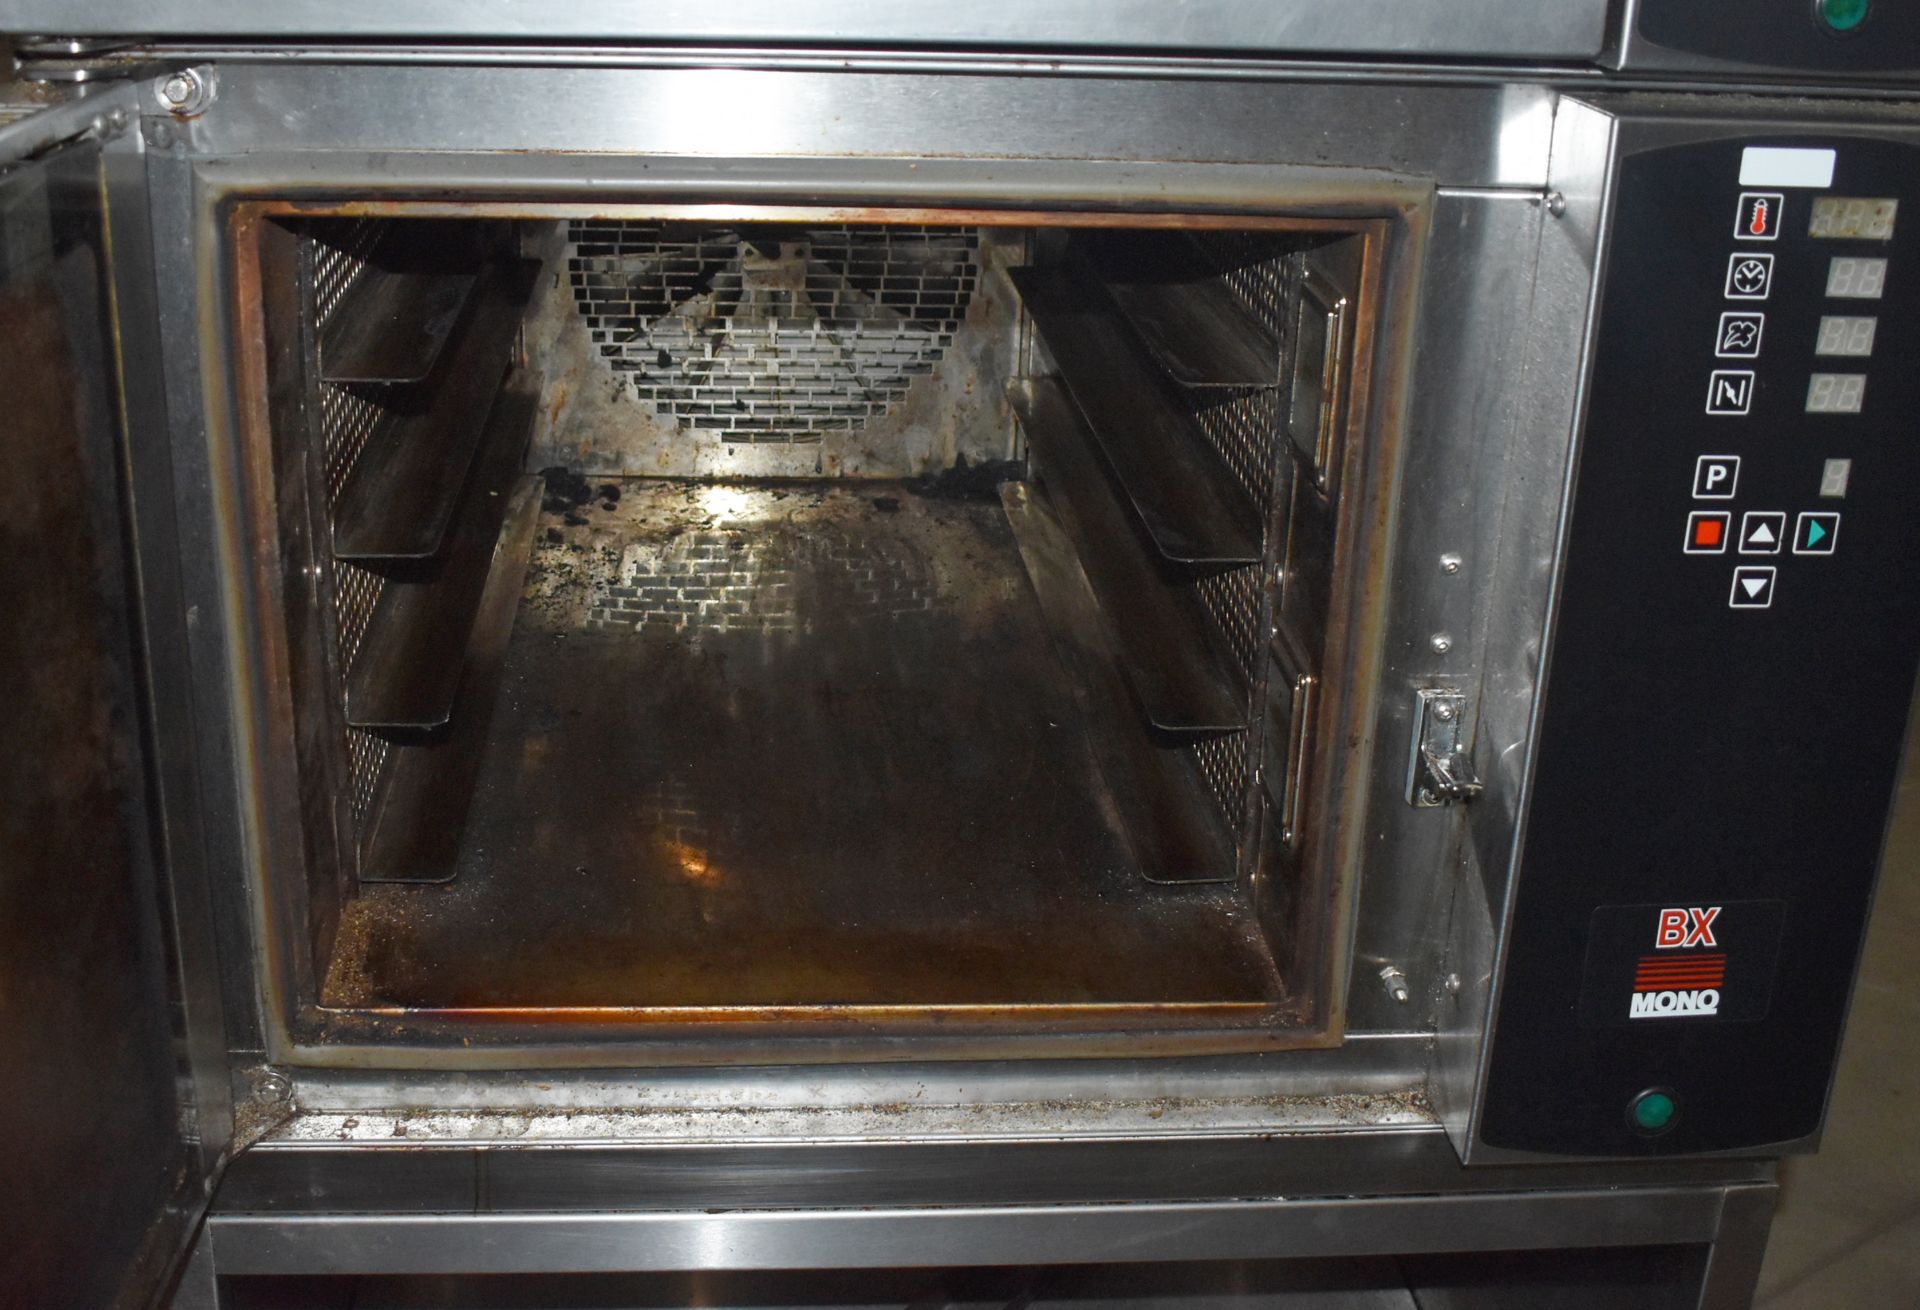 1 x Mono Double Classic and Steam BX Convection Oven - Model FG159C - 3 Phase Power - H210 x W83 x - Image 7 of 15